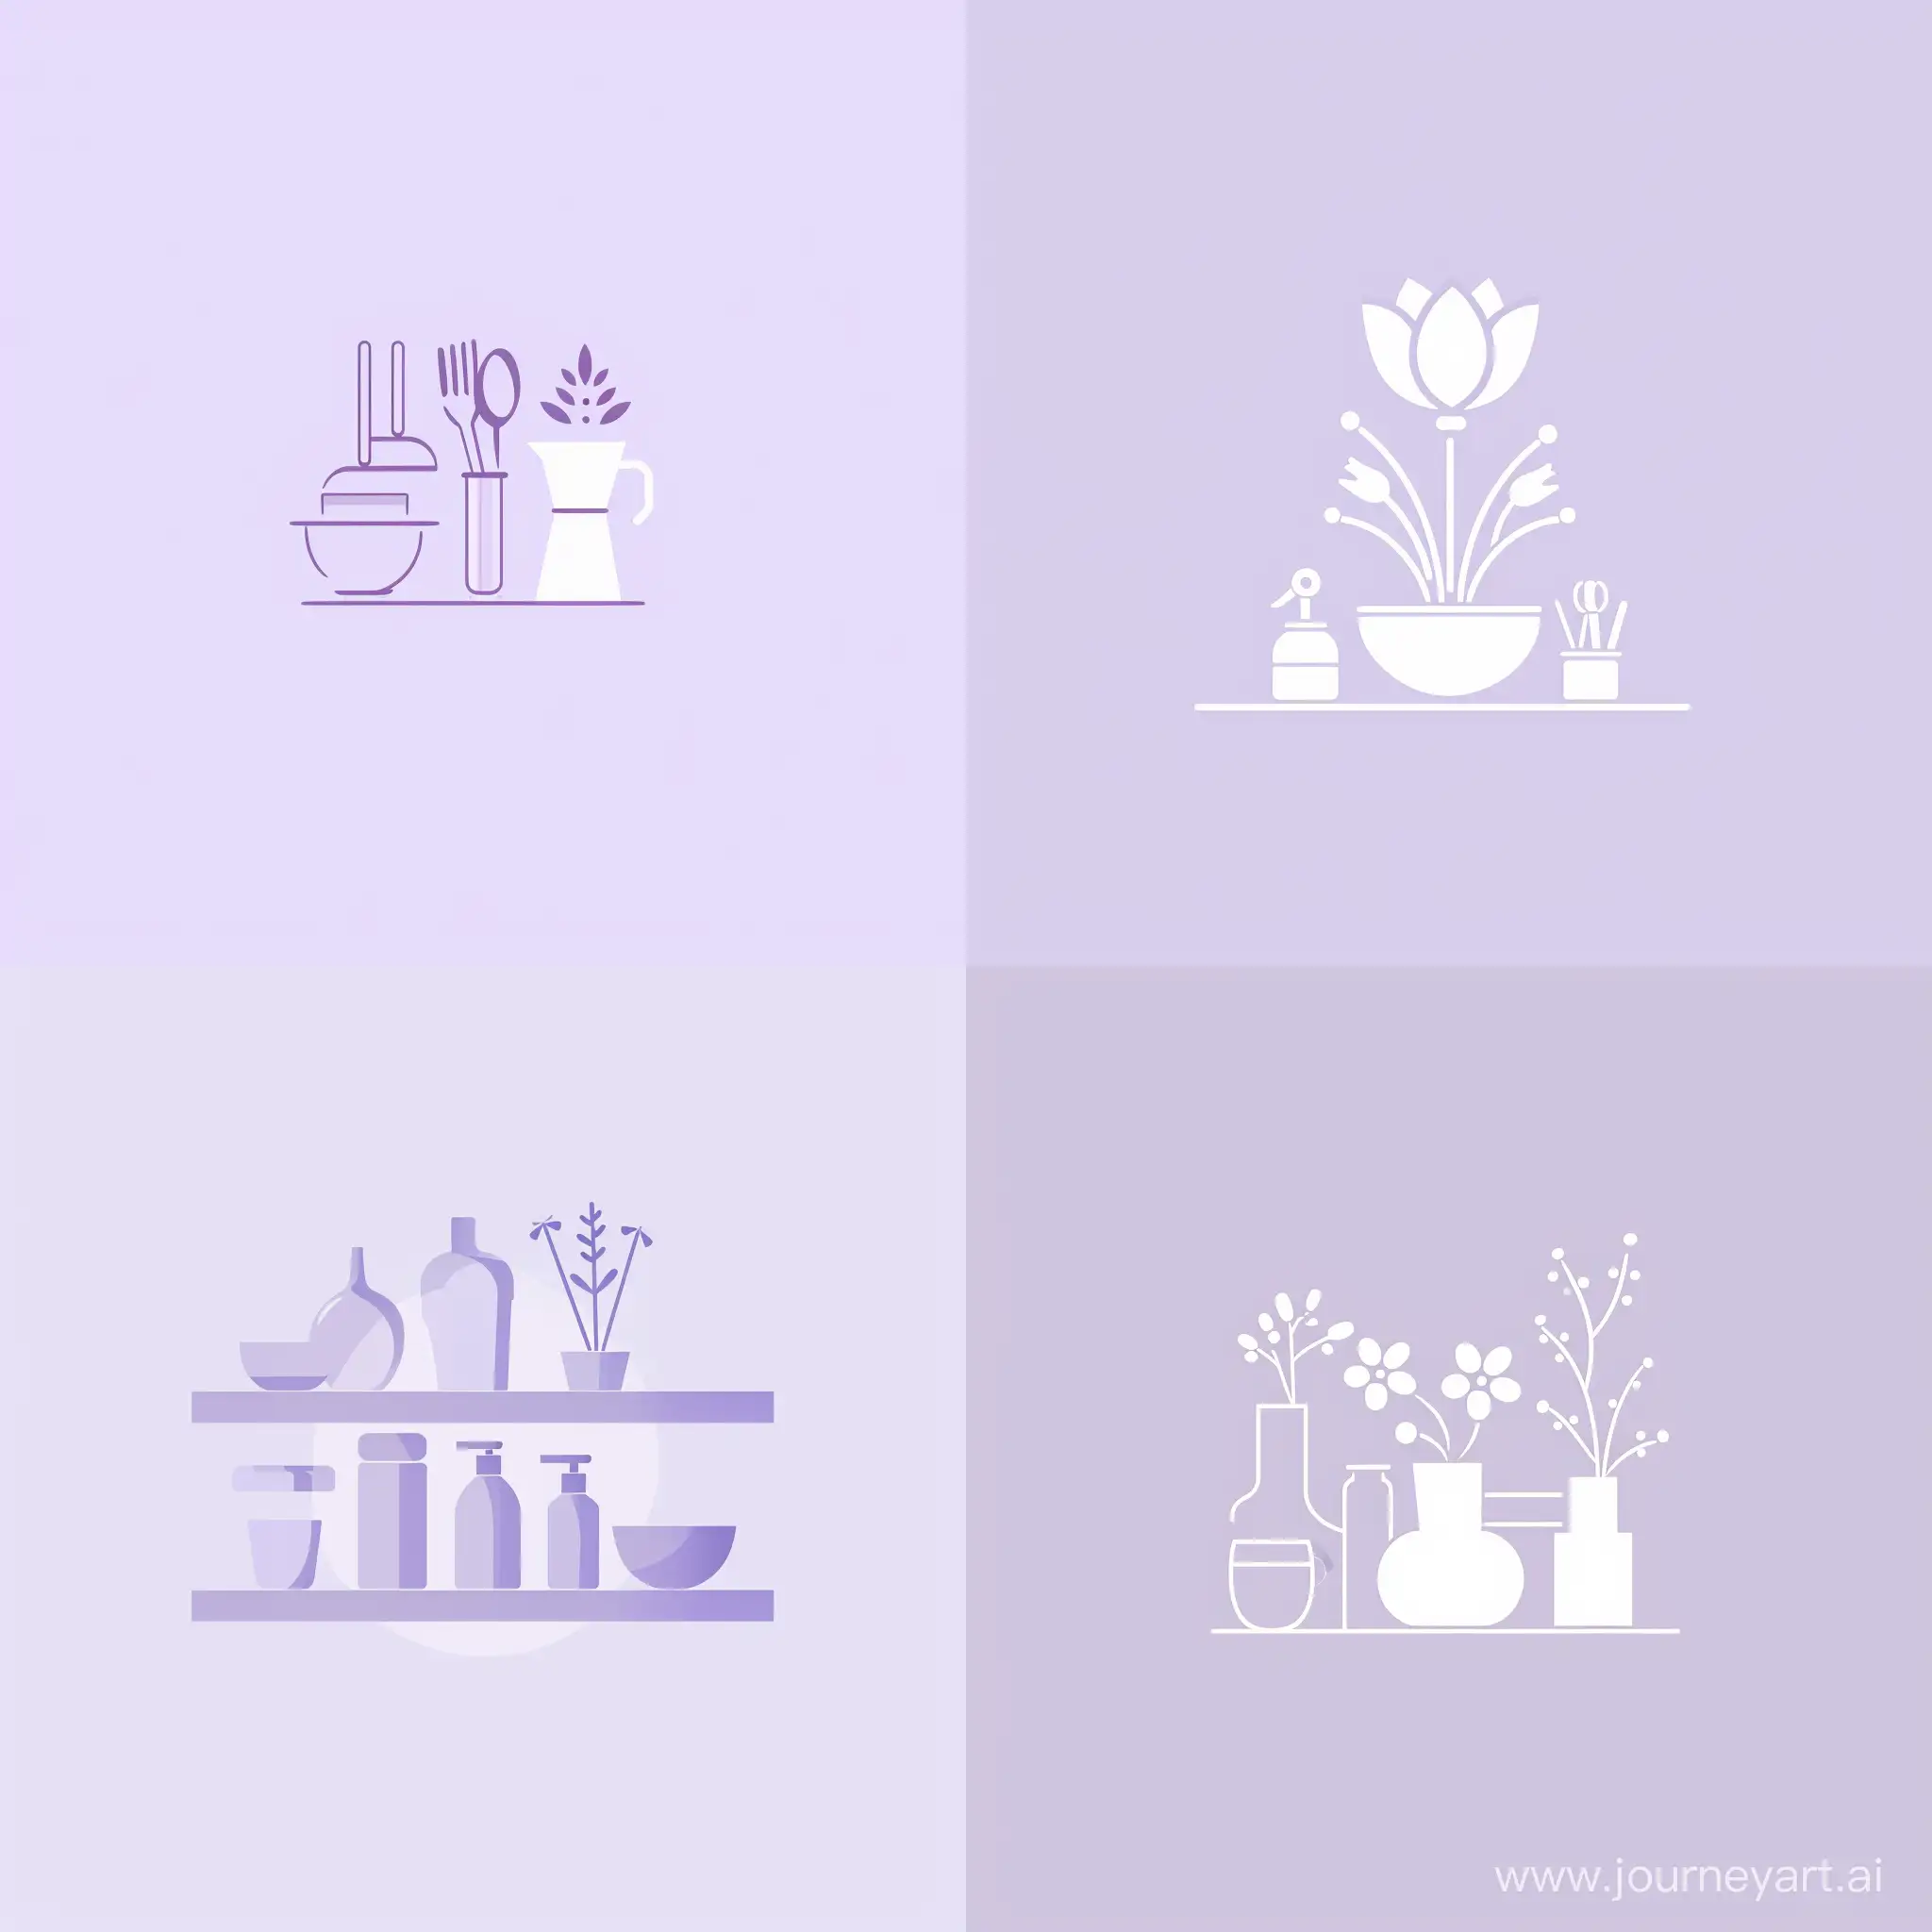 "Create a logo for a store of household utilities and home decor, simple and minimalist, with pastel purple colors."